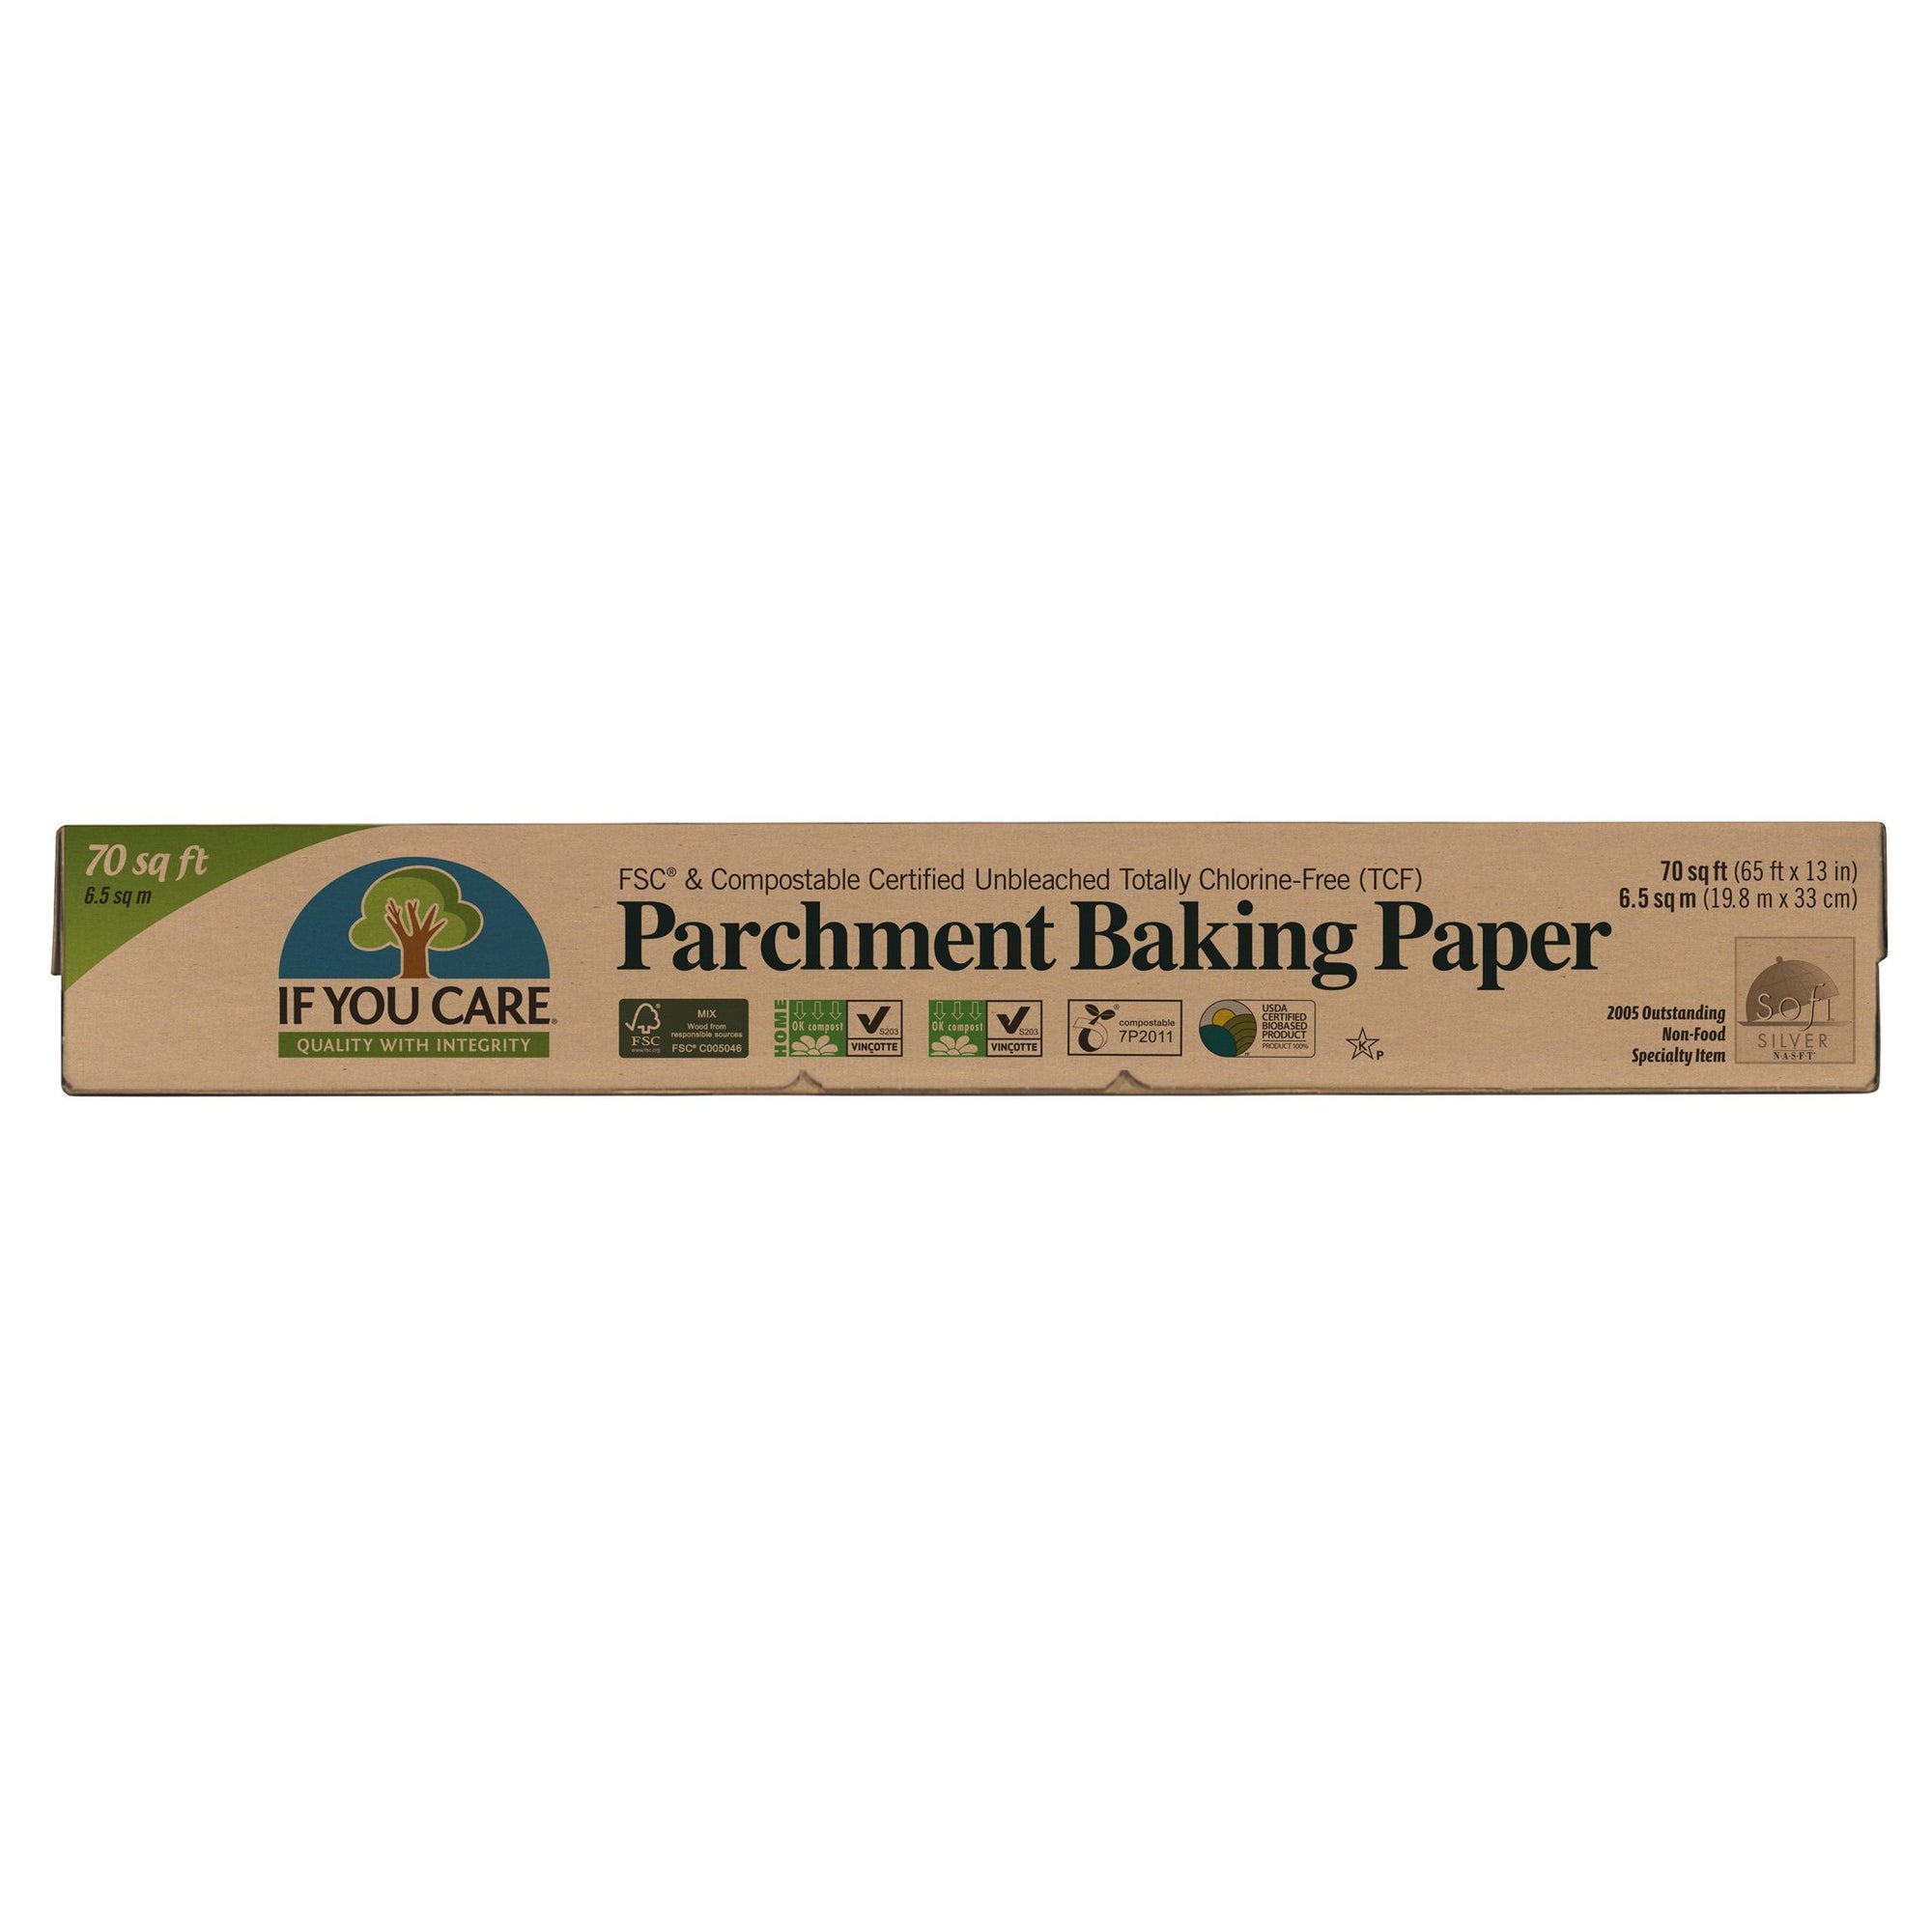 Parchment Roasting Bags, 2 count, If You Care